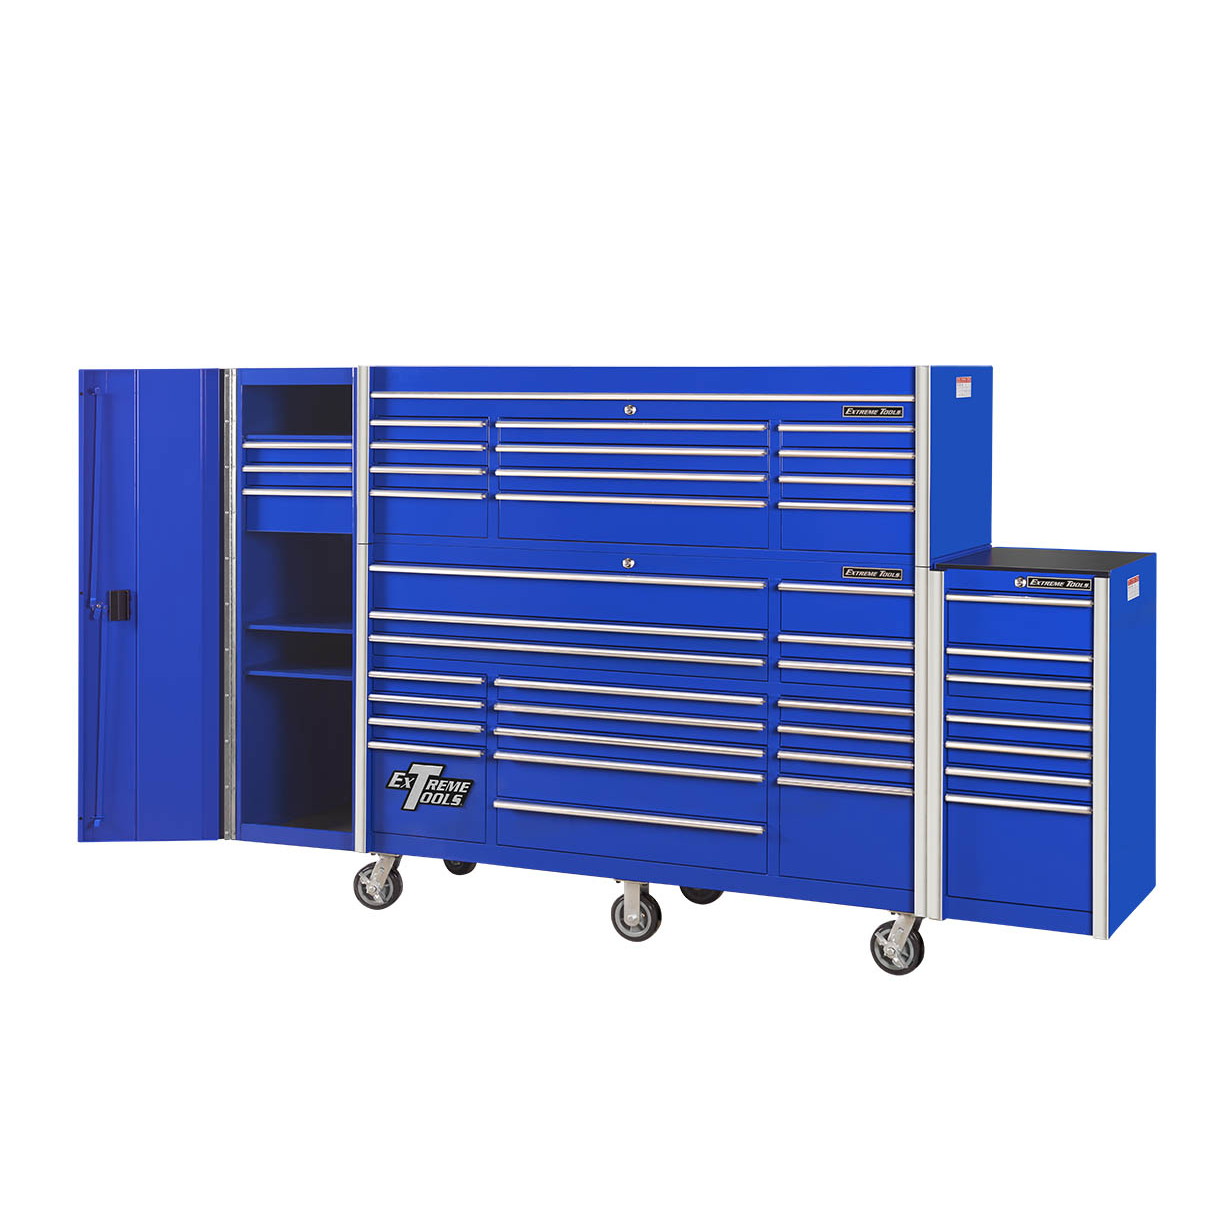 Extreme Combo: 72 Roller Cabinet, Top Chest, Side Locker & Side Box